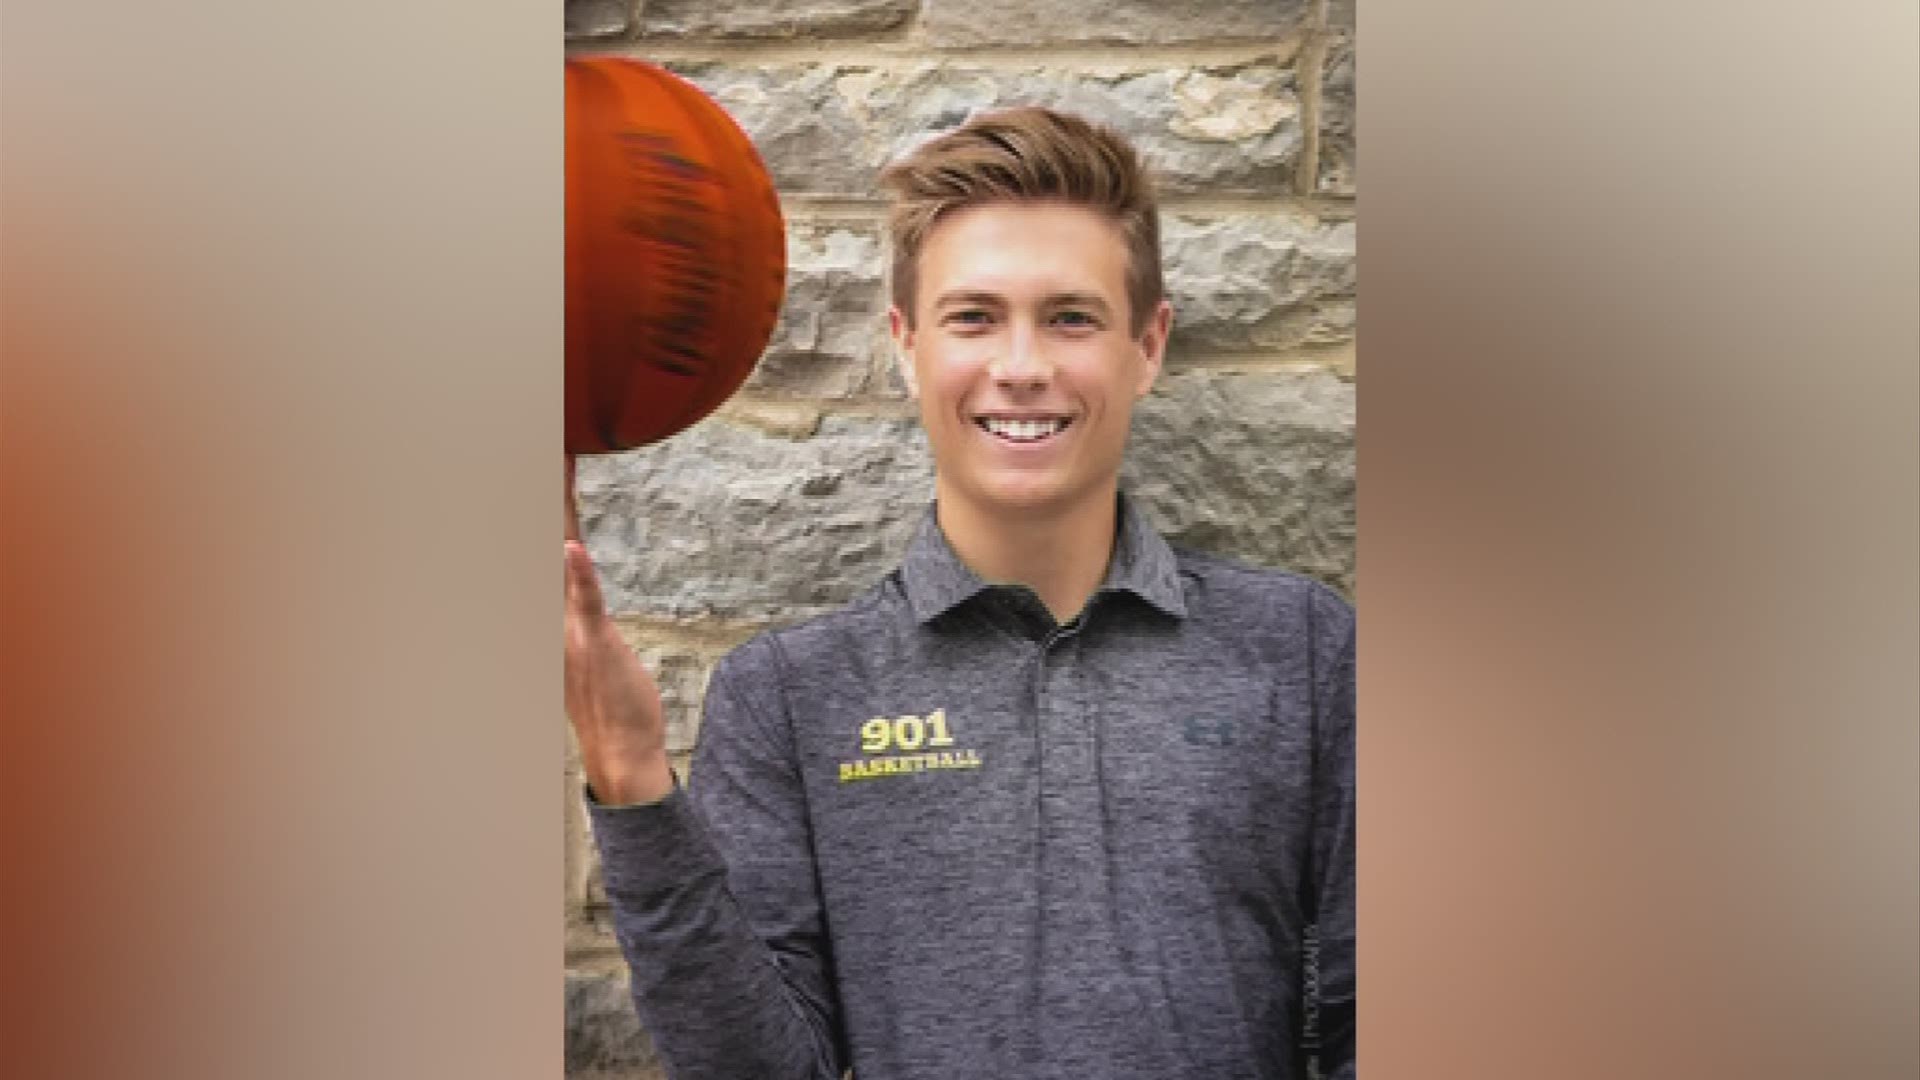 Stone Foltz died last month at a frat at Bowling Green State University.